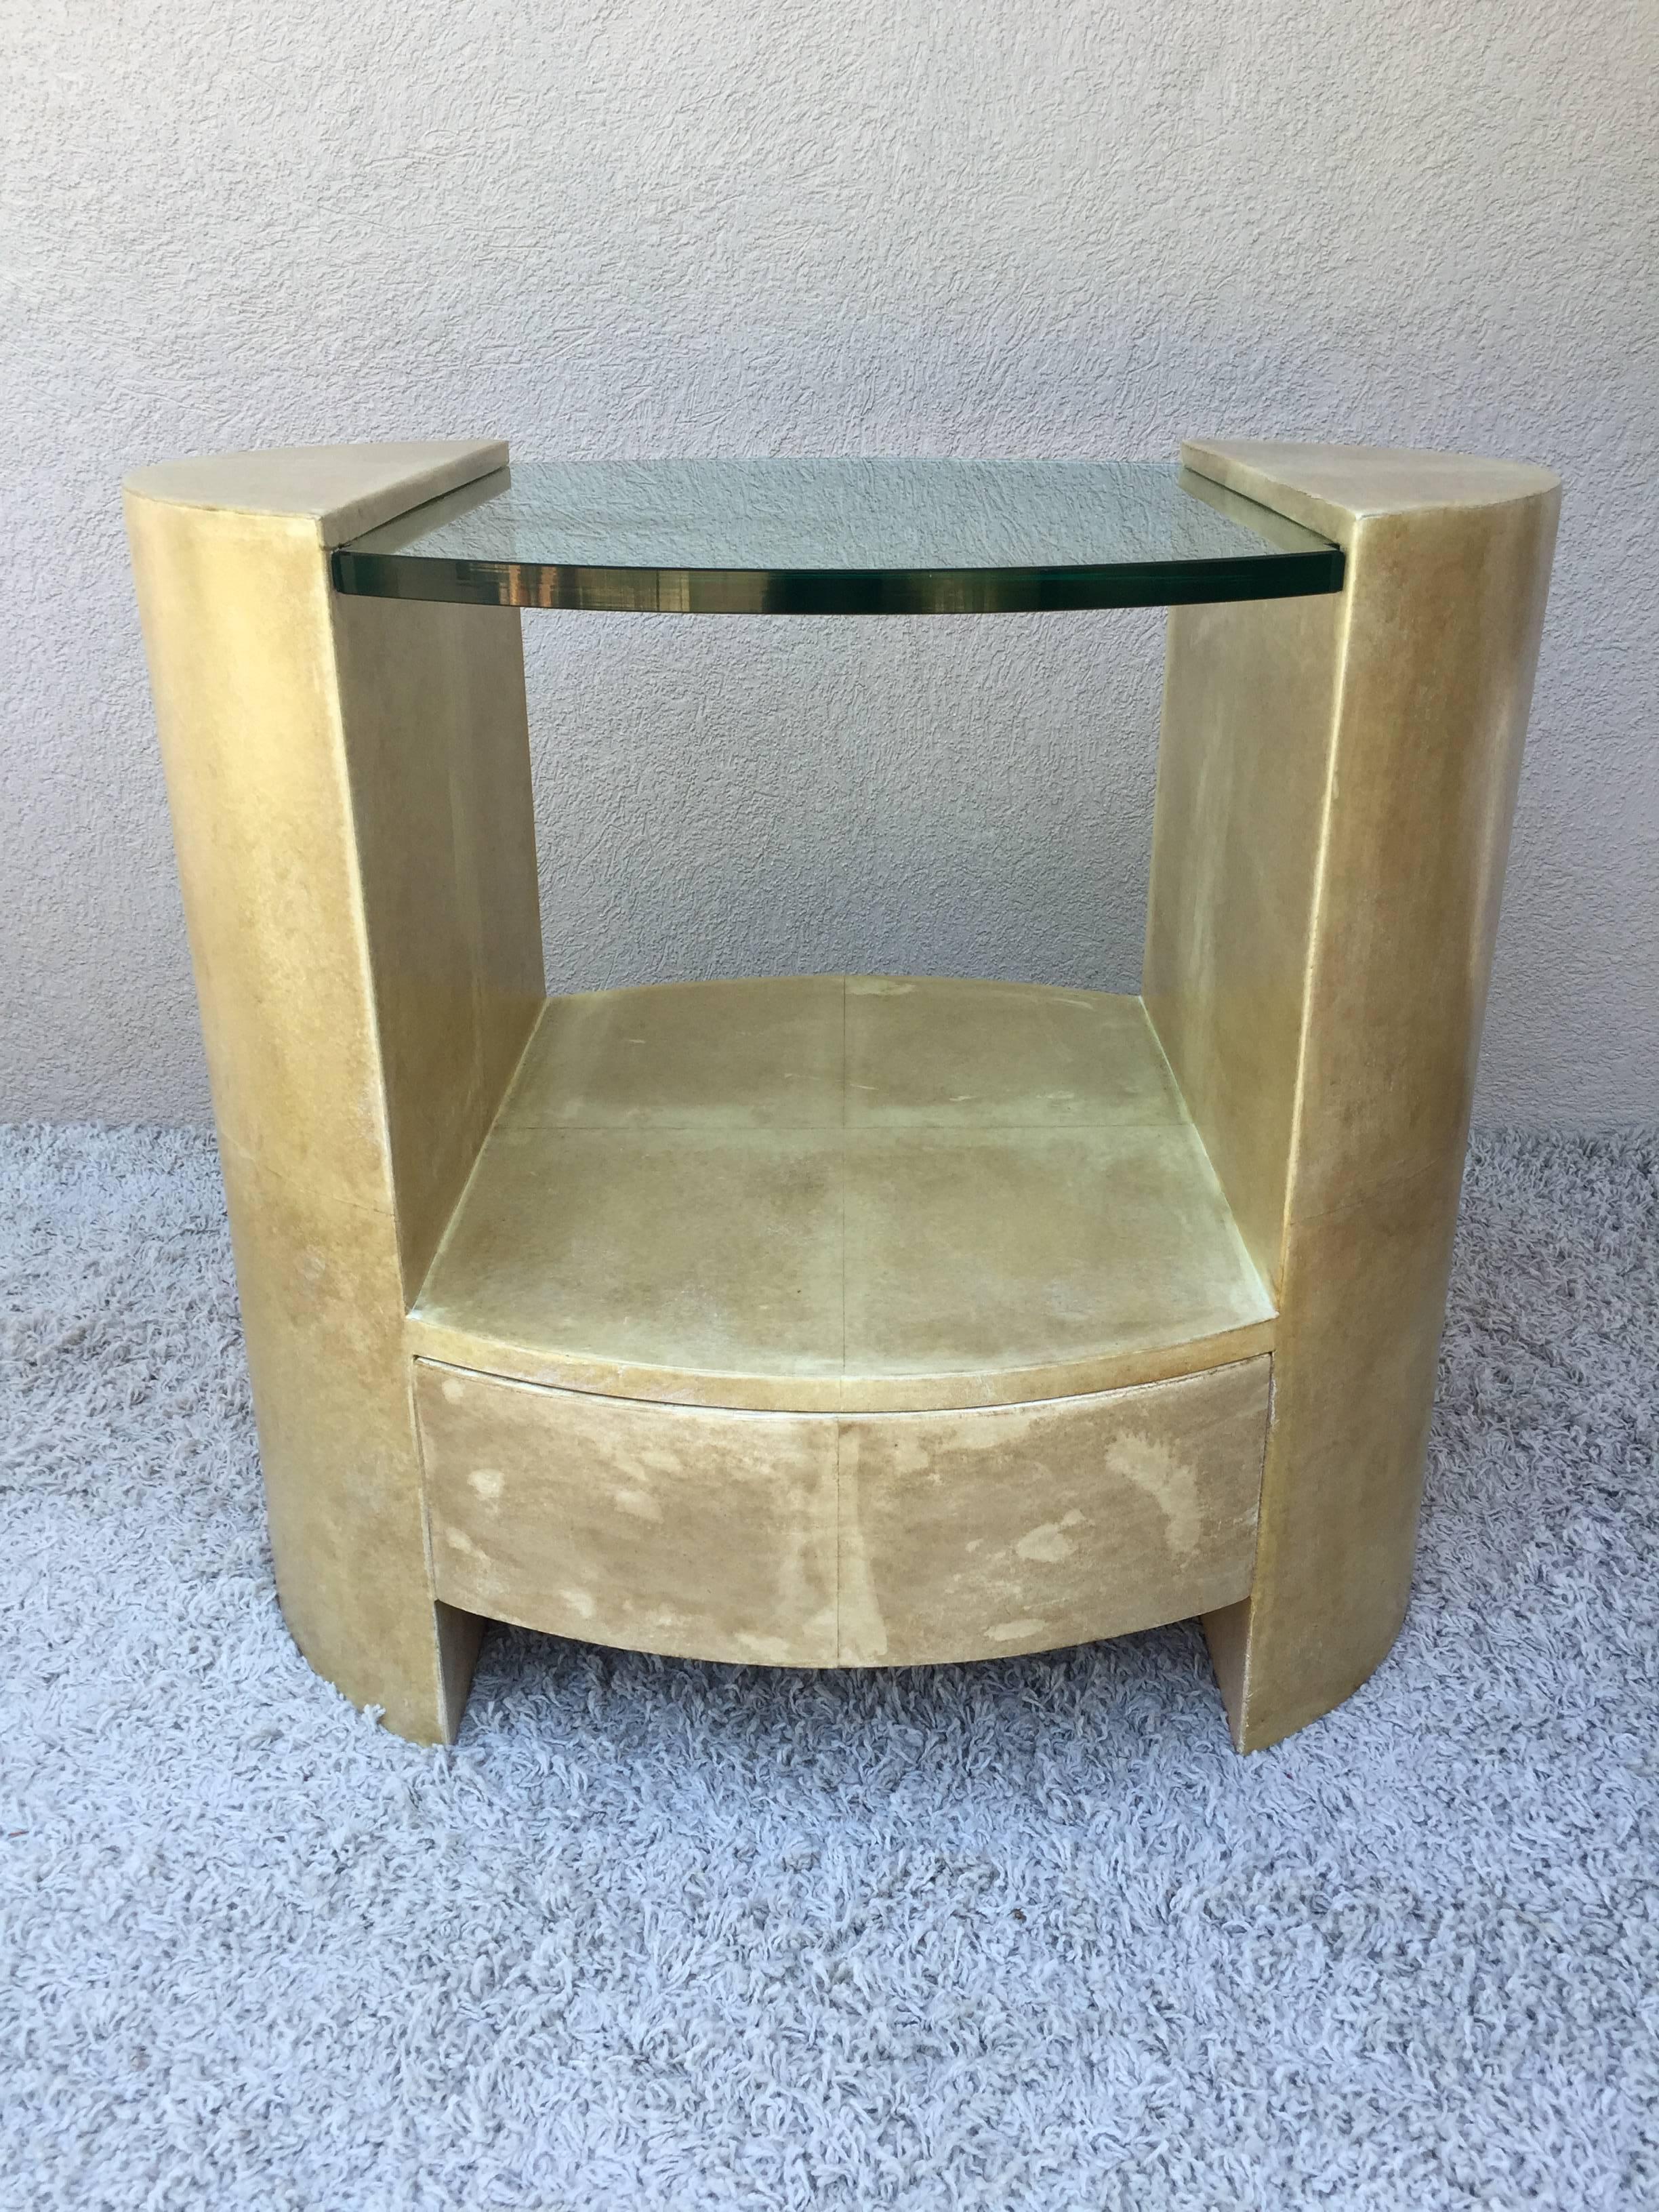 Pair of Ron Seff goatskin parchment colored glass side table/nightstands, with one large draw compartment custom one of a kind. With sectioned design in the manner of Samuel Marx. Beige tan natural skin tone.